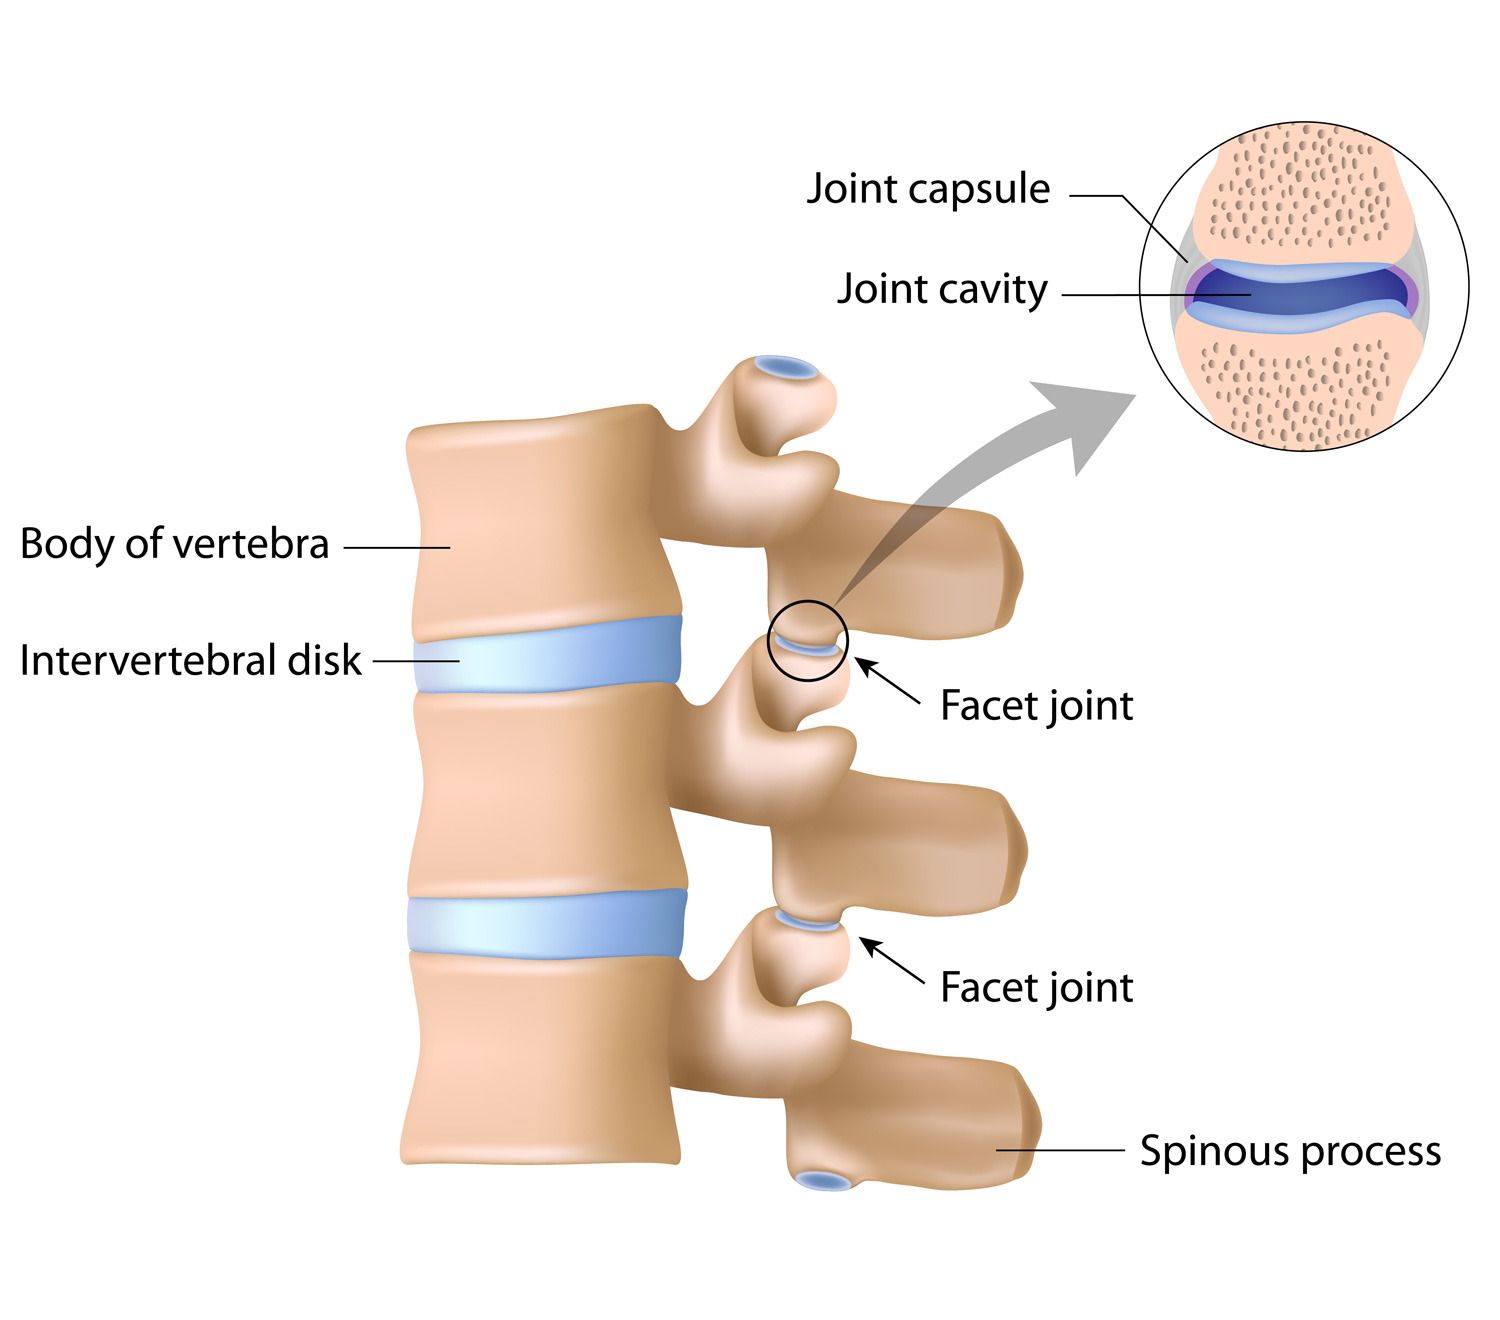 Illustration of the facet joint and what could cause facet joint syndrome